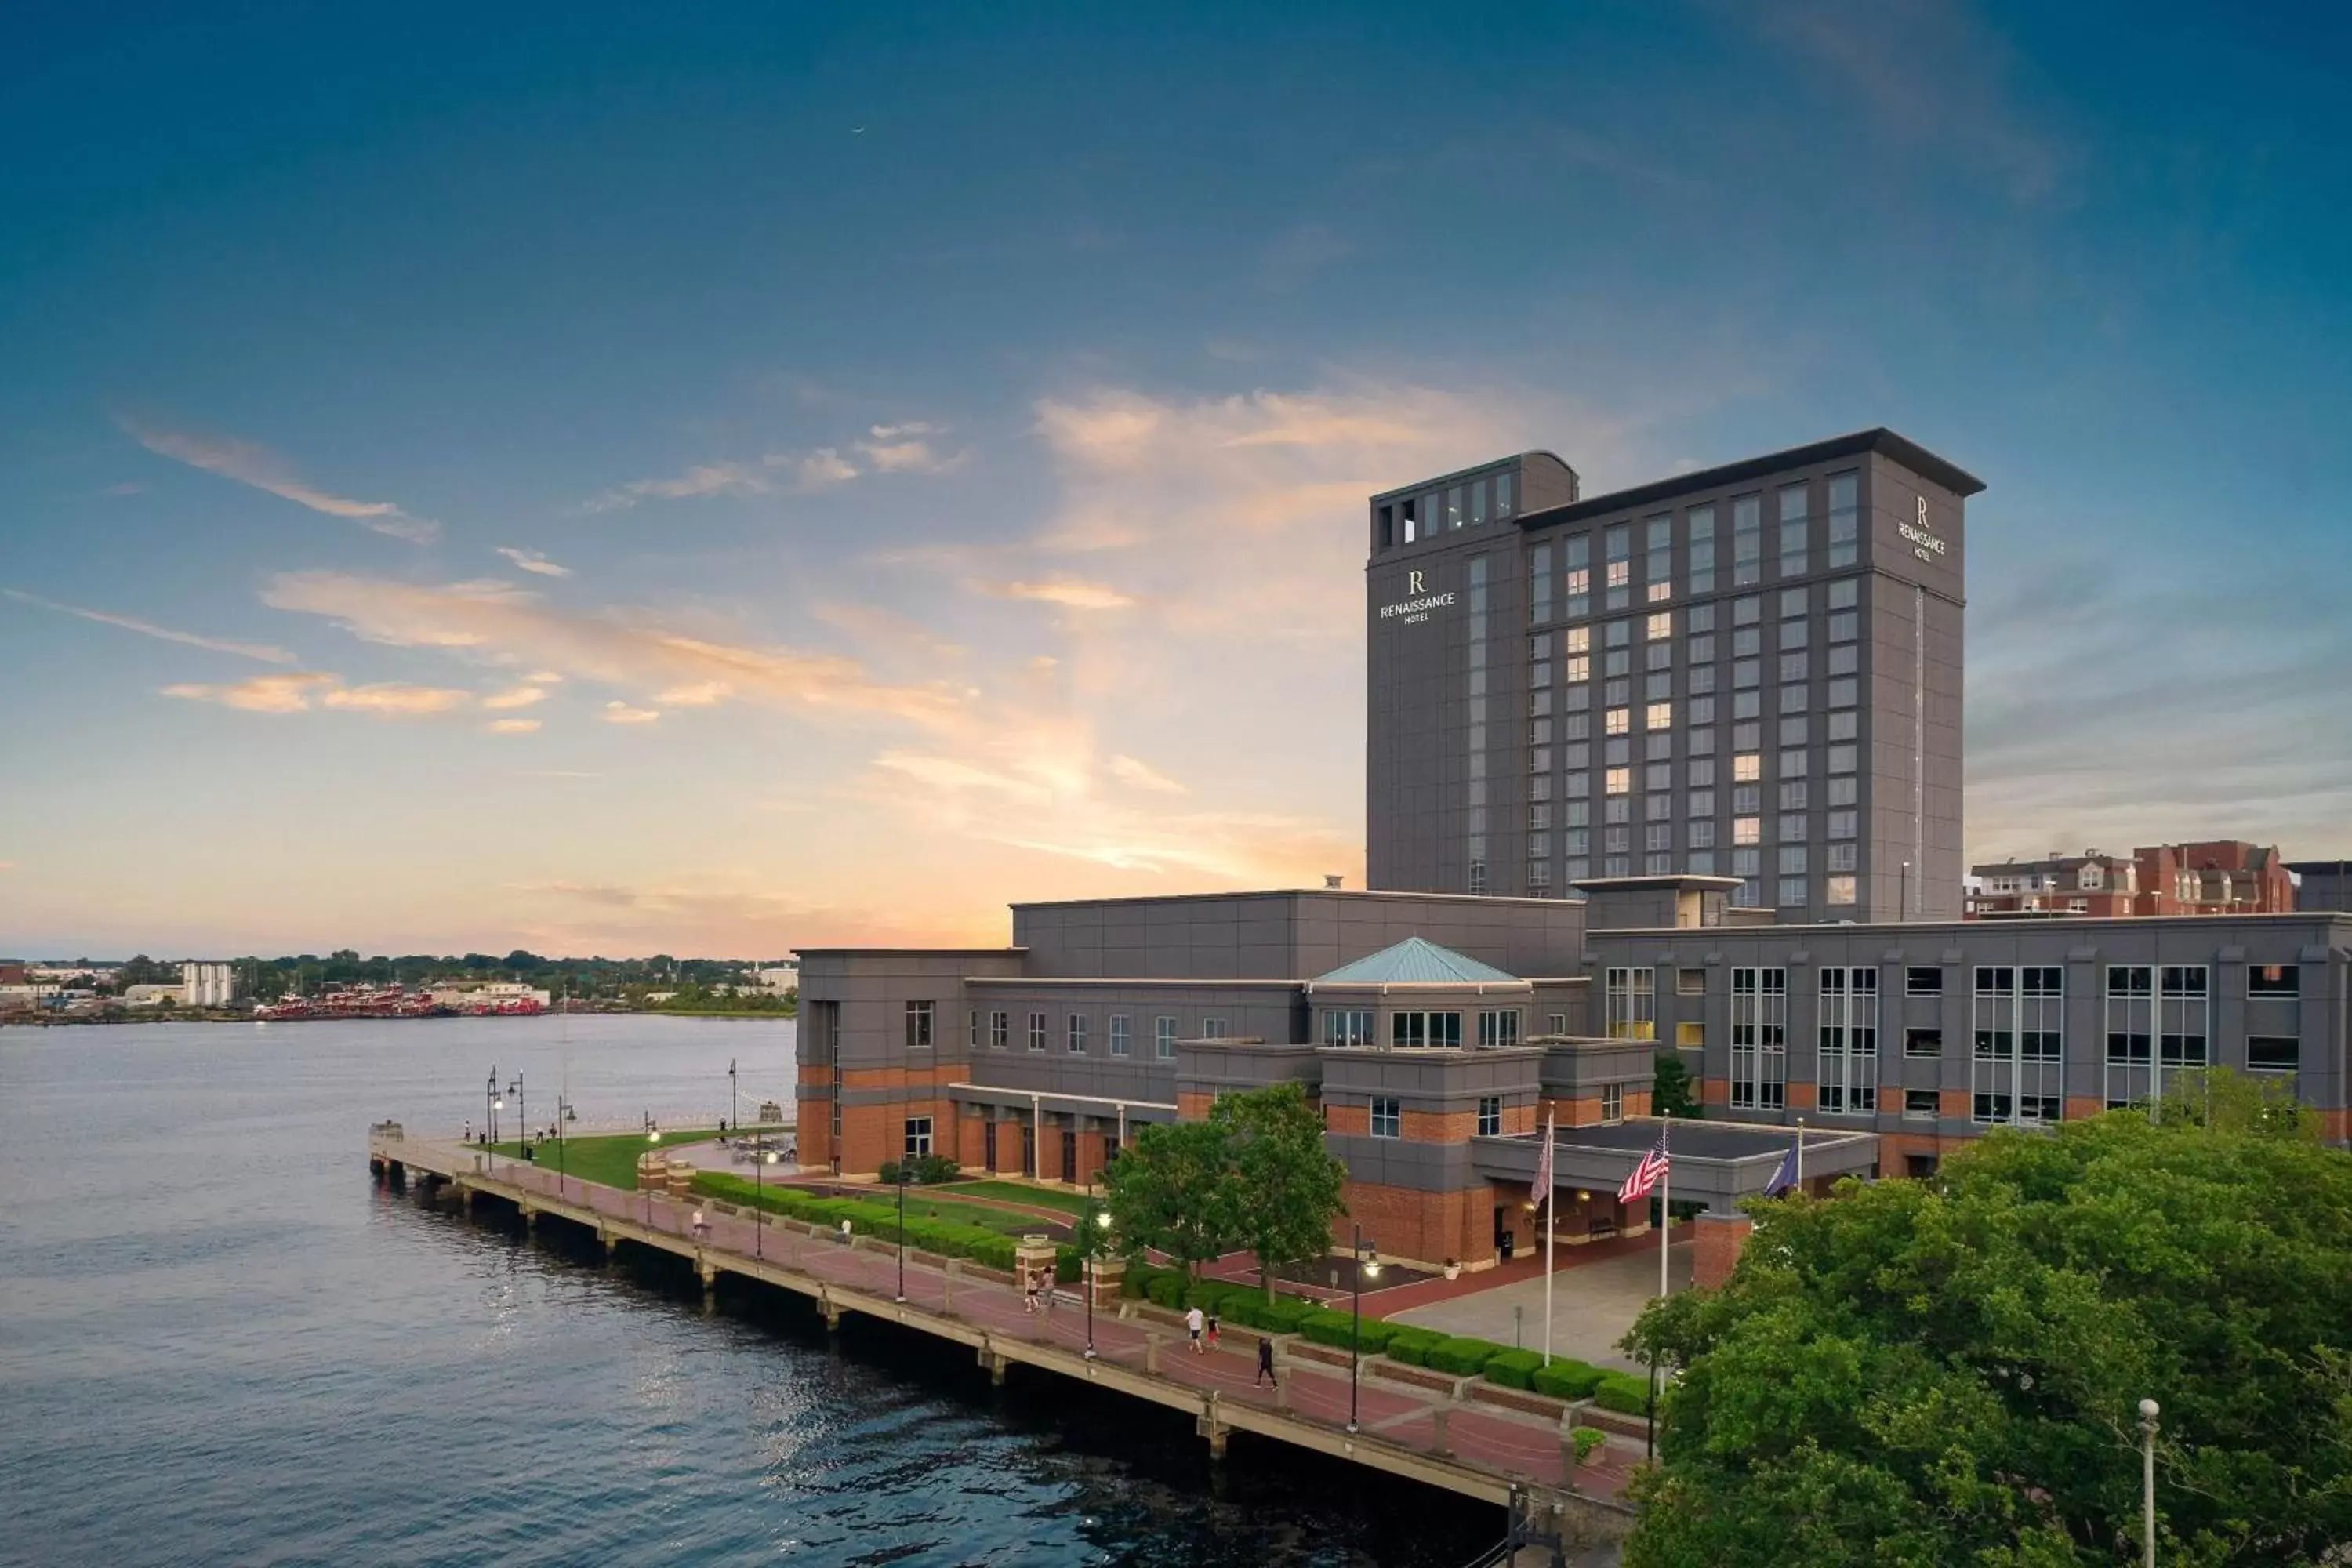 Property building in Renaissance Portsmouth-Norfolk Waterfront Hotel